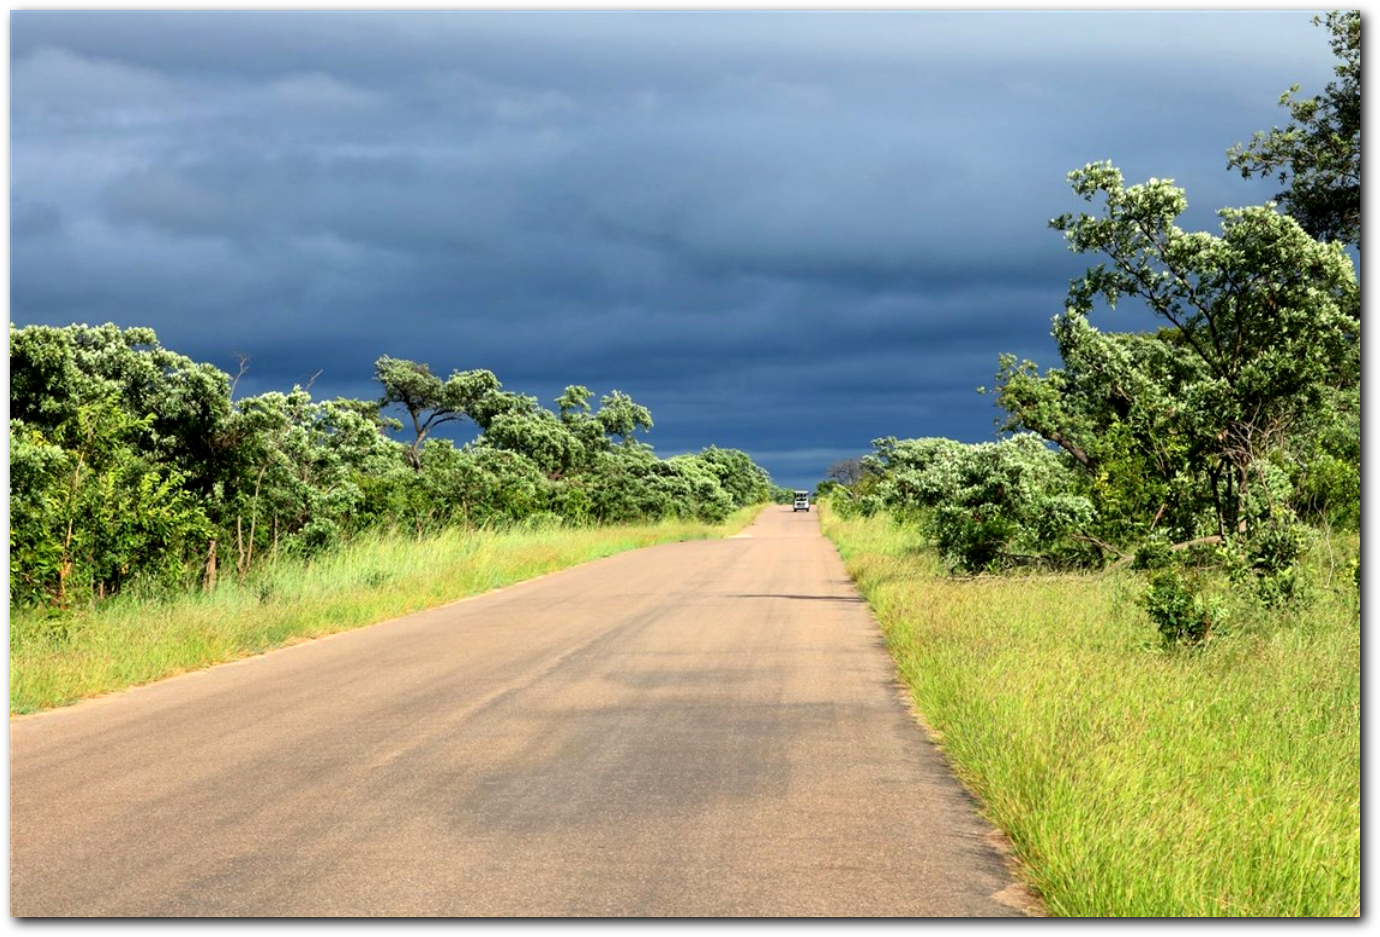 Safari adventure Kruger National Park with storm approaching